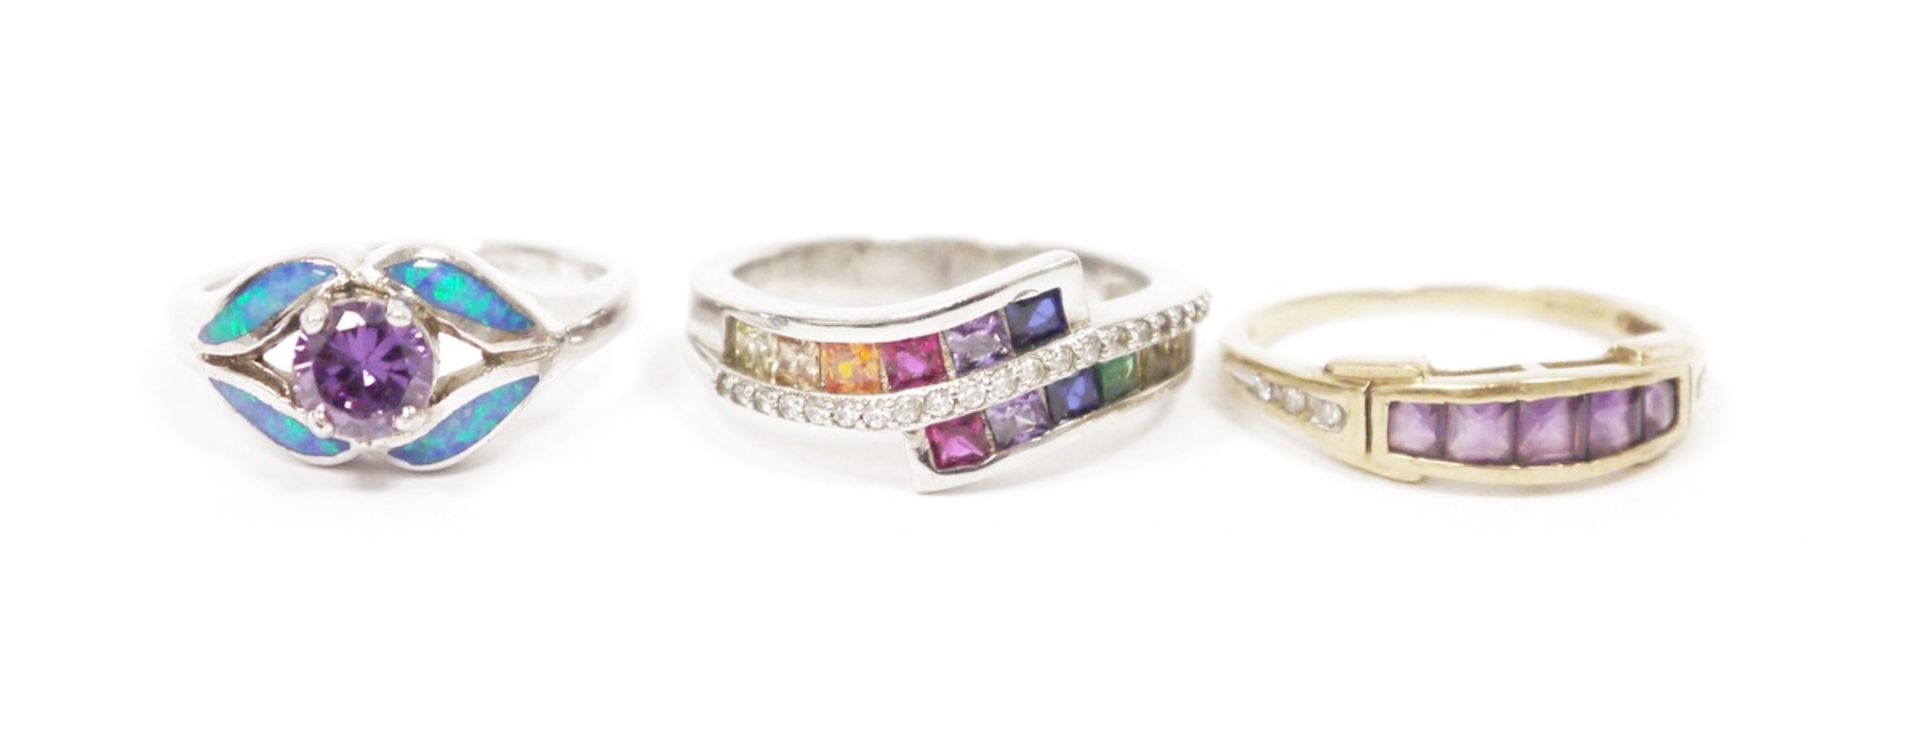 Two silver and coloured stone set rings and a 9ct gold, amethyst and diamond ring set five square